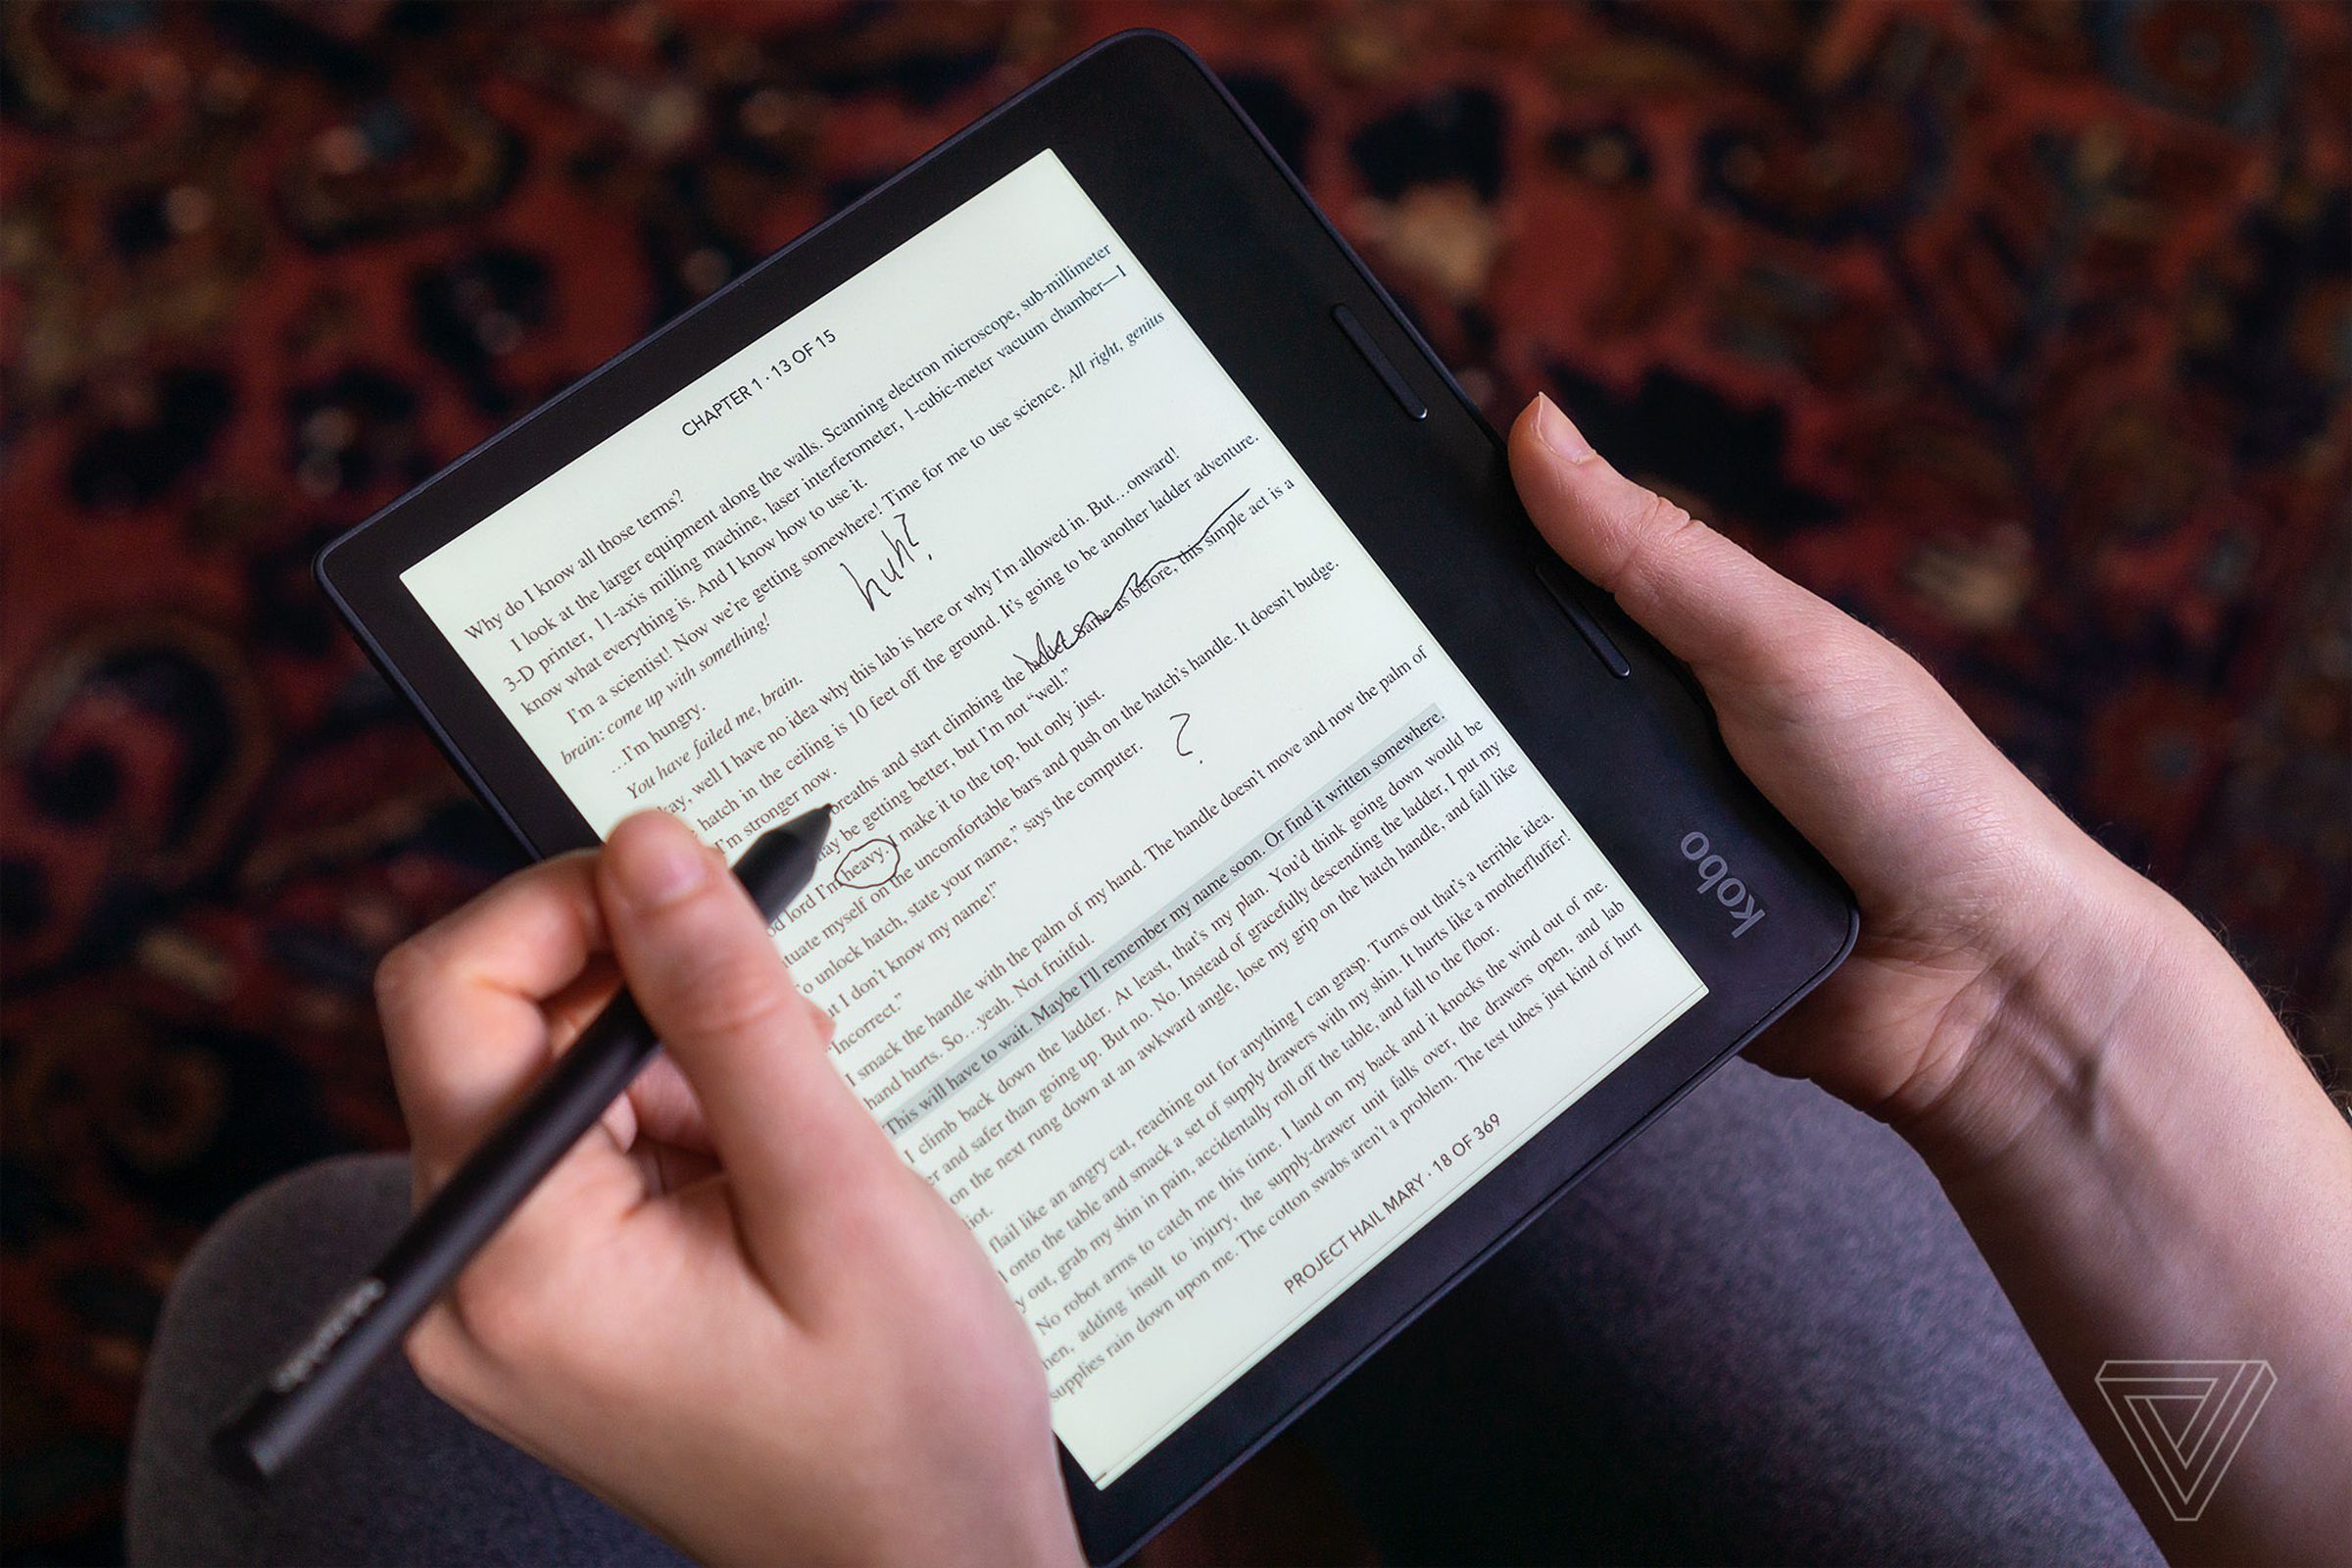 The Kobo Sage excels as an e-reader, although the display is a bit cramped for writing.